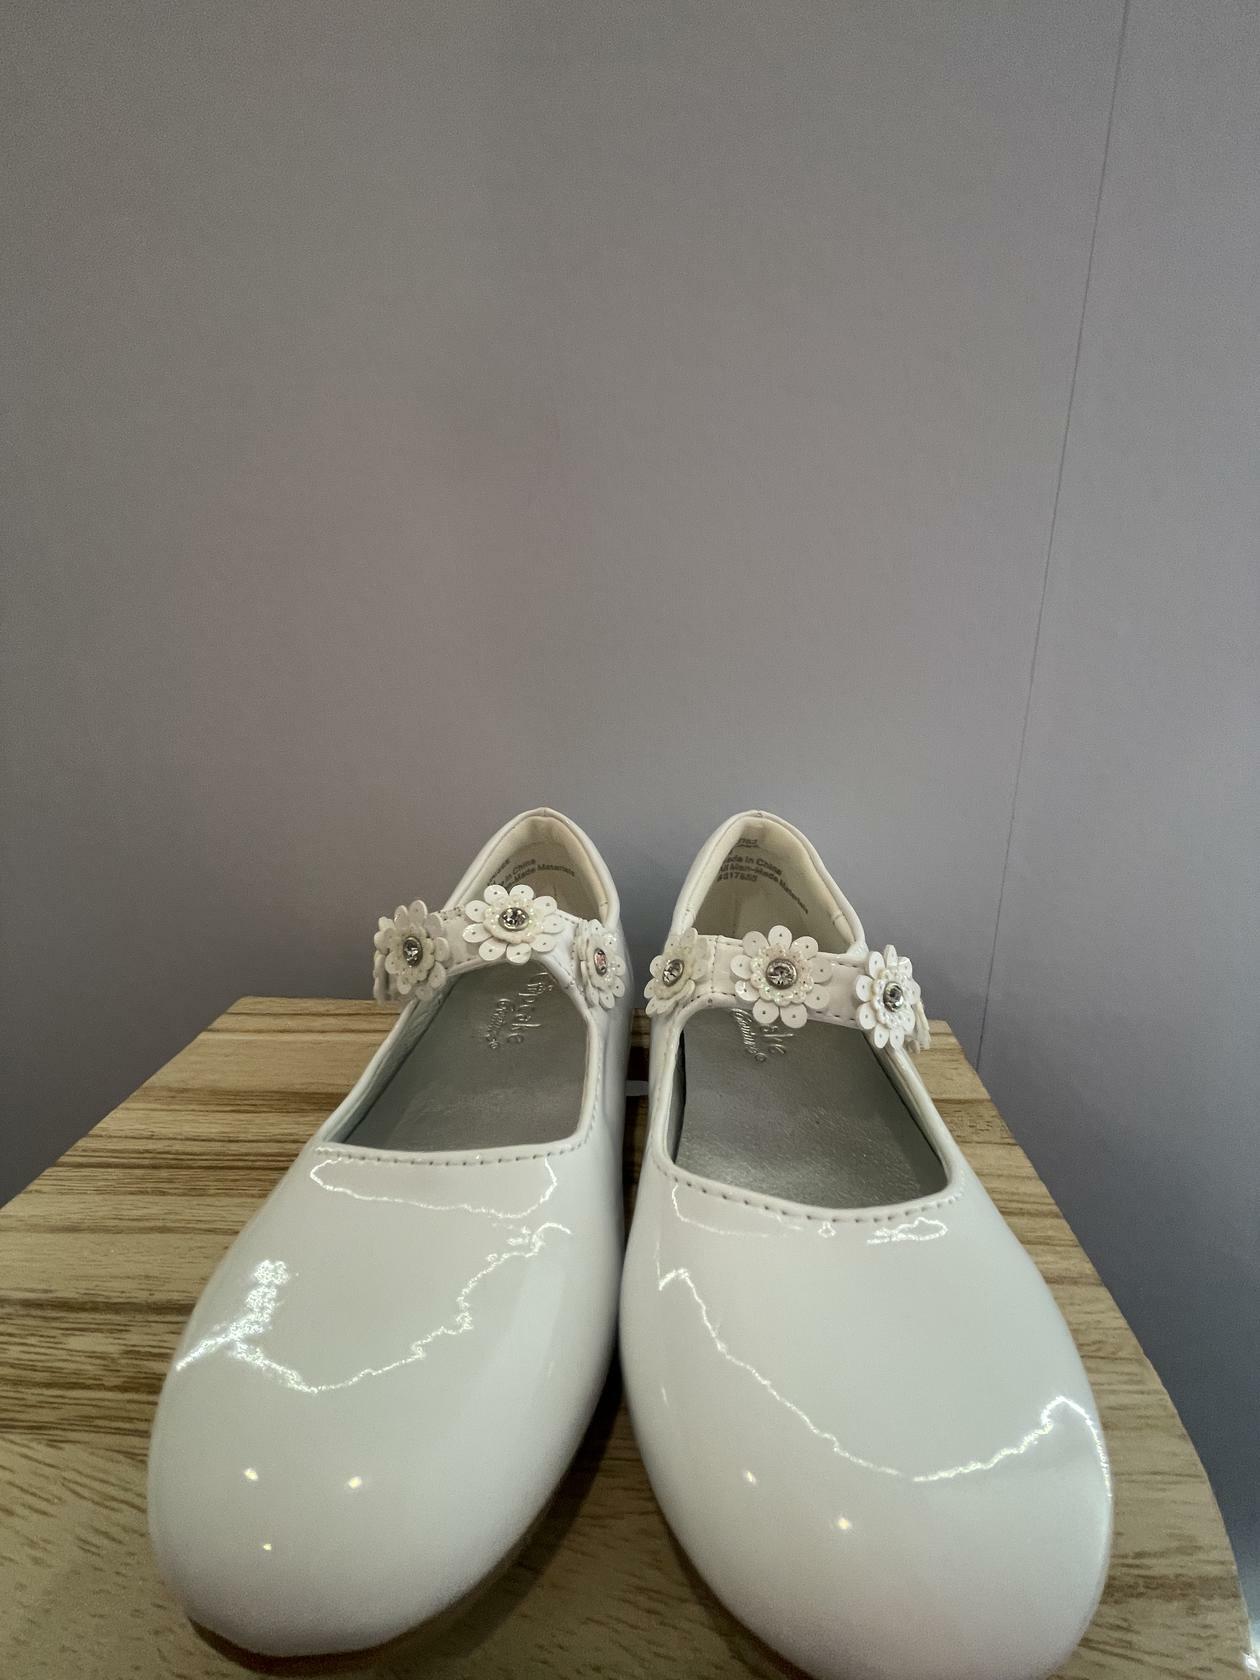 Cupcake Couture Girls Floral Strap Shoes WHITE Flowers- size 8M - Very Good